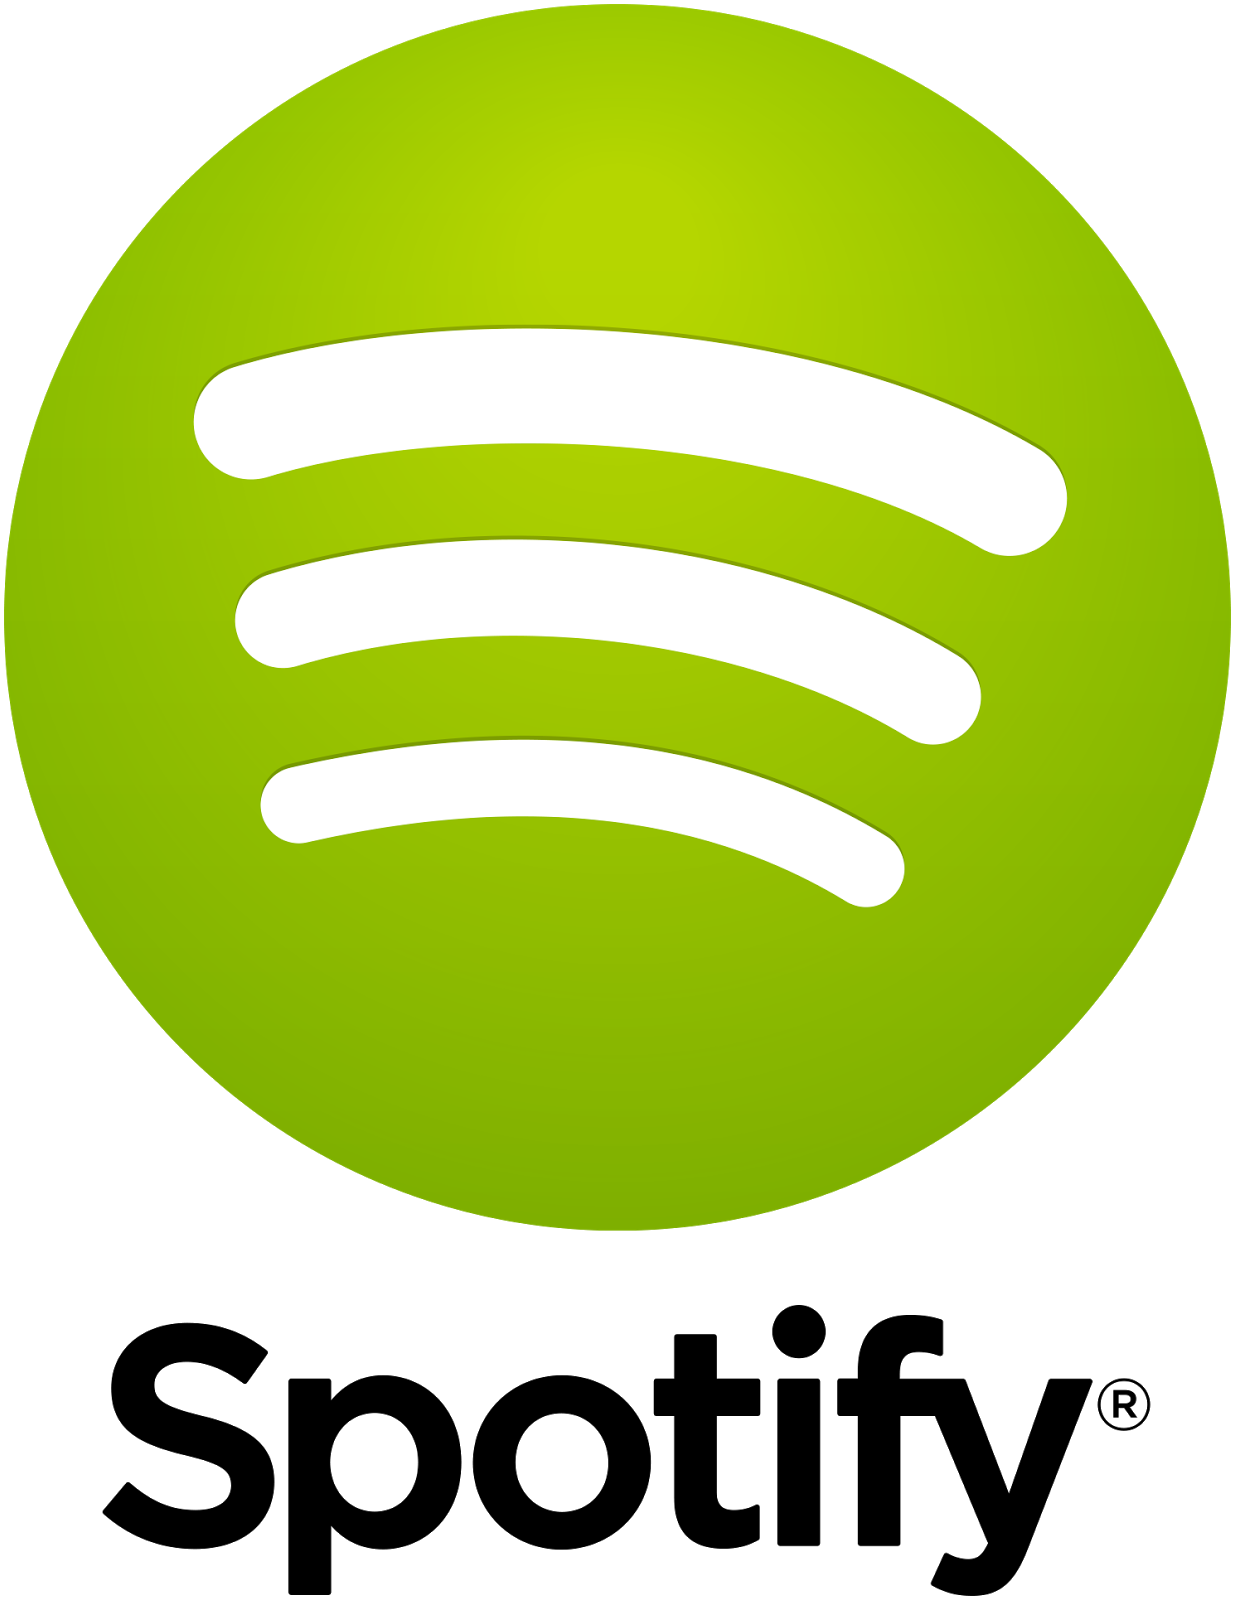 spotify free android